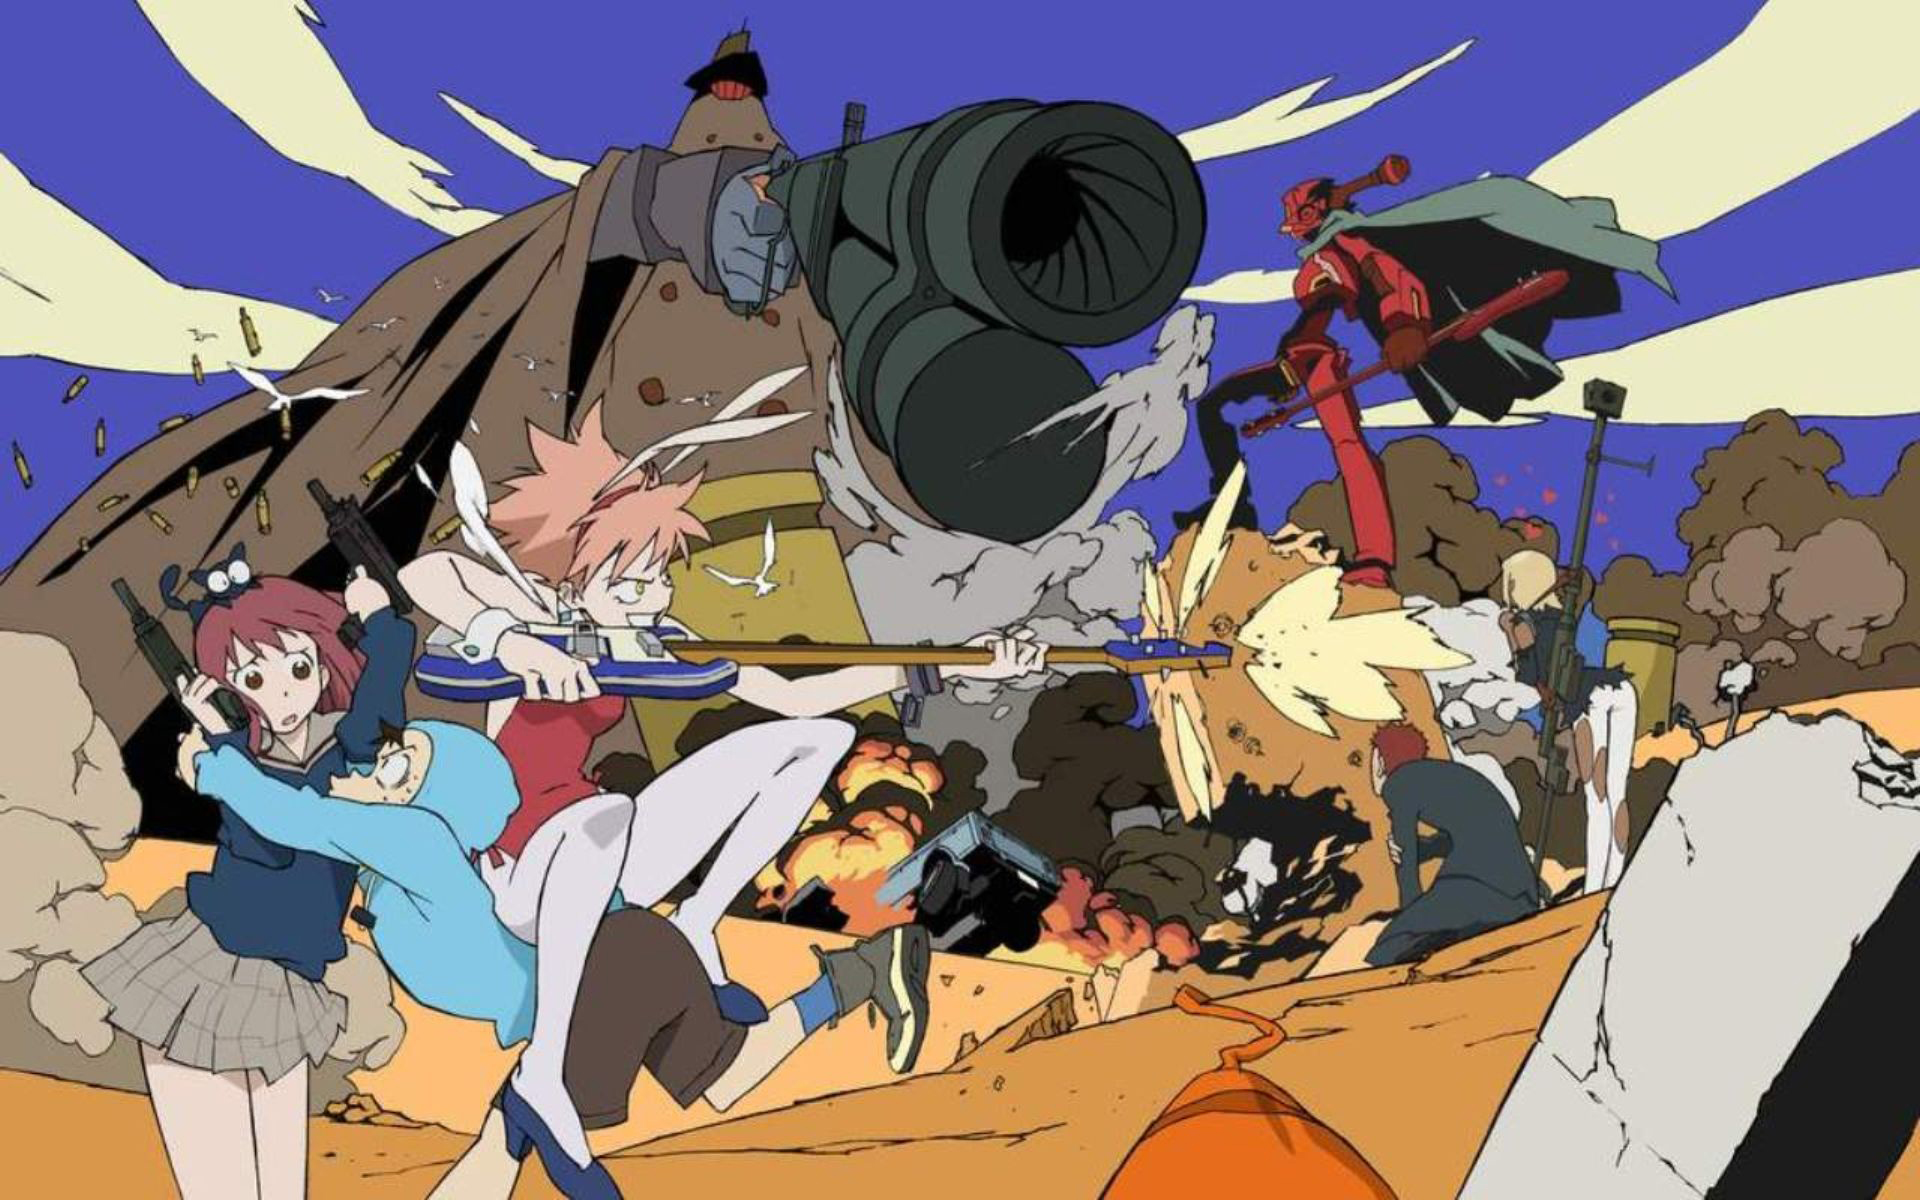 FLCL Watch Order: Where to Start Watching